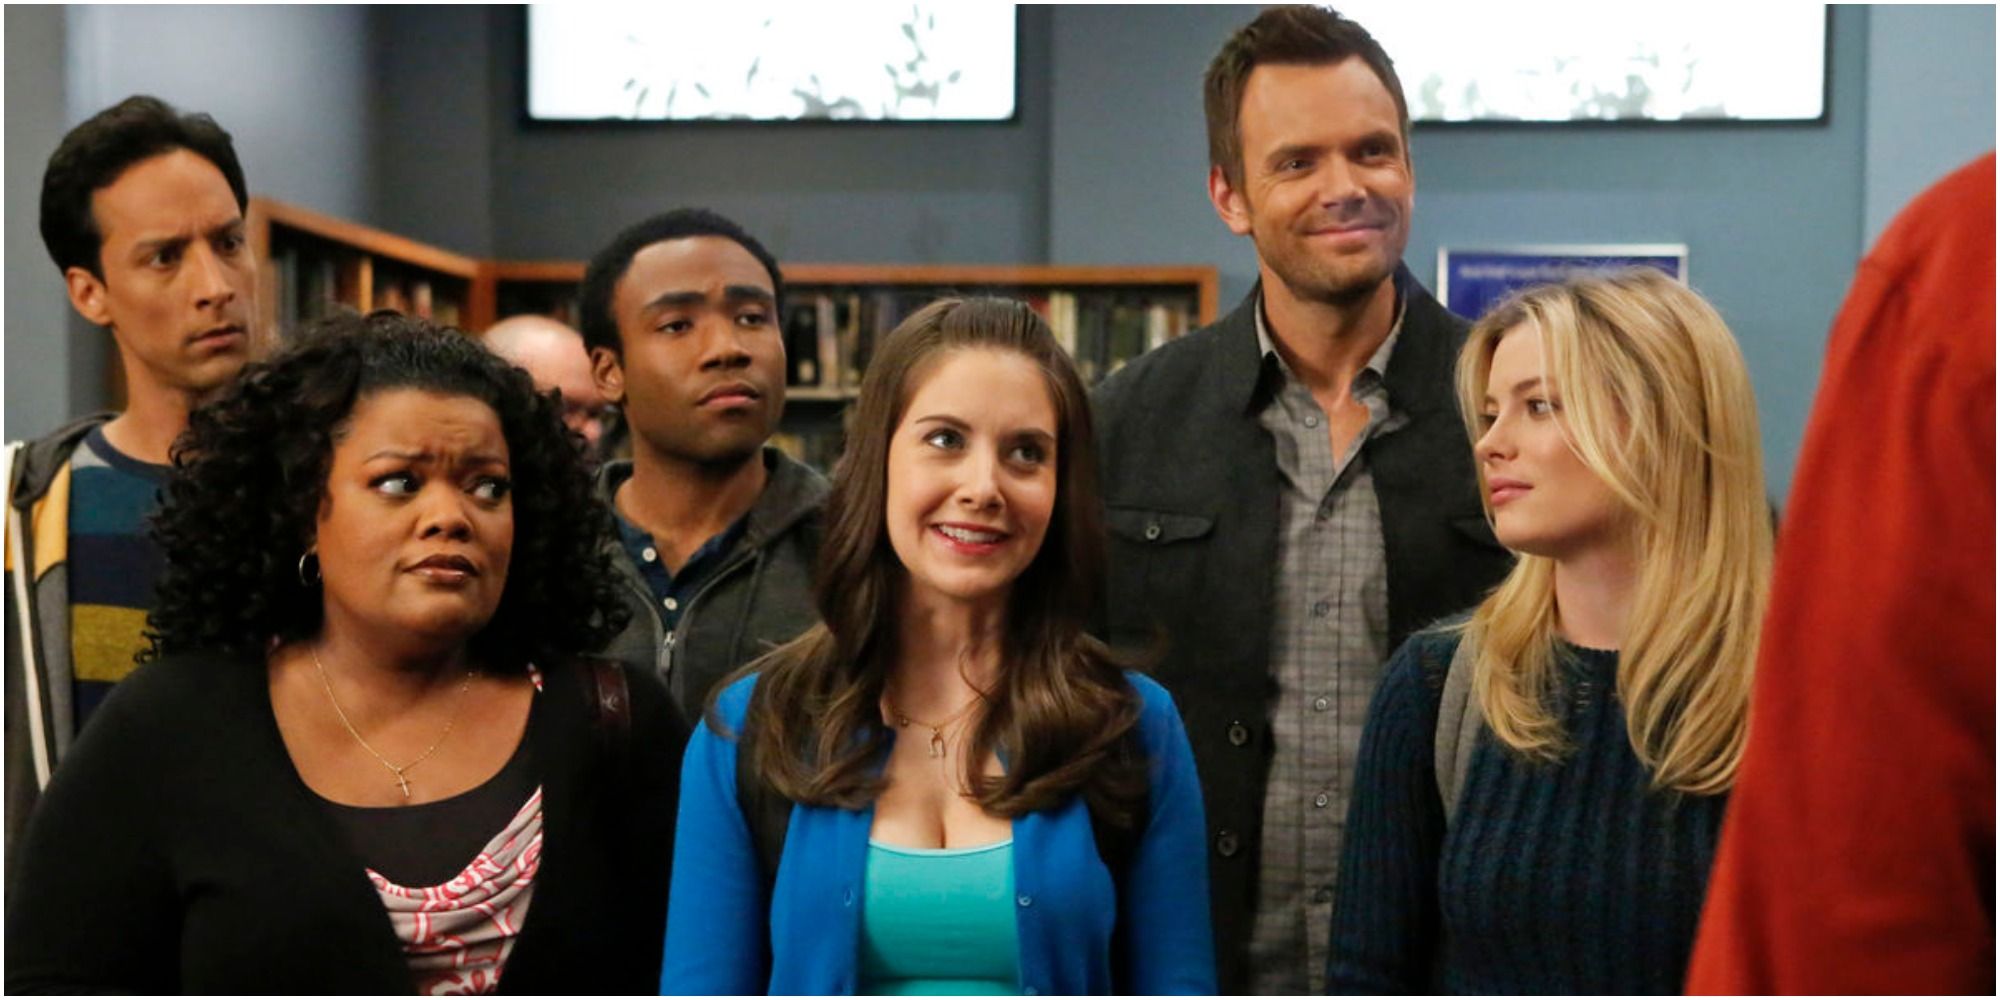 Community Movie Has a Good Chance Of Happening Says Joel McHale